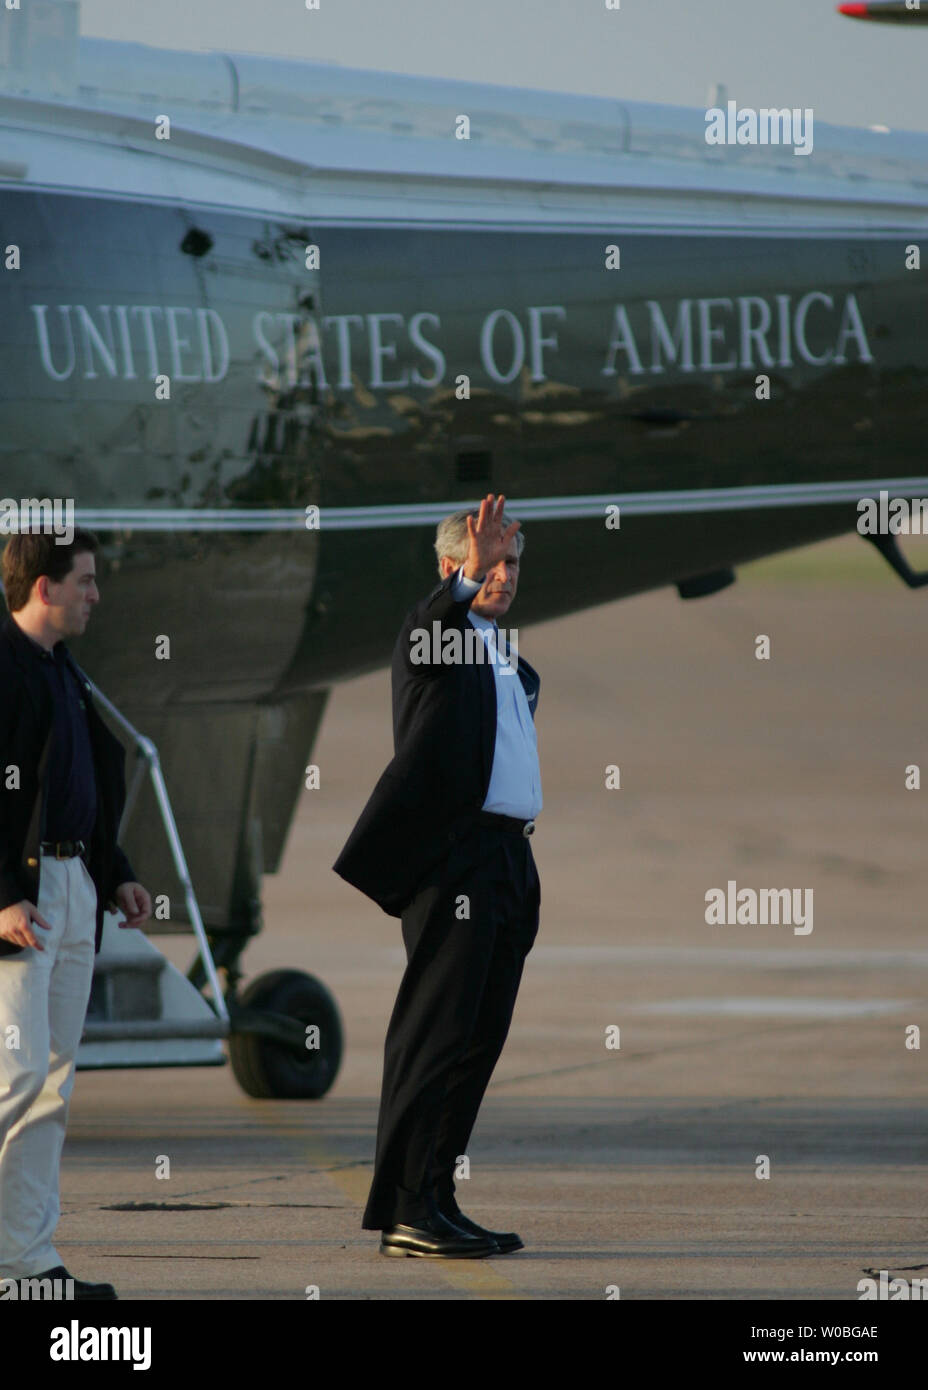 President George W. Bush arrives in Waco, Texas to spend the Father's Day weekend at his ranch in Crawford, Texas on June 16, 2006. President Bush waves to the greeters while waiting for the arrival of First Lady Laura Bush. (UPI Photo/Ron Russek II) Stock Photo